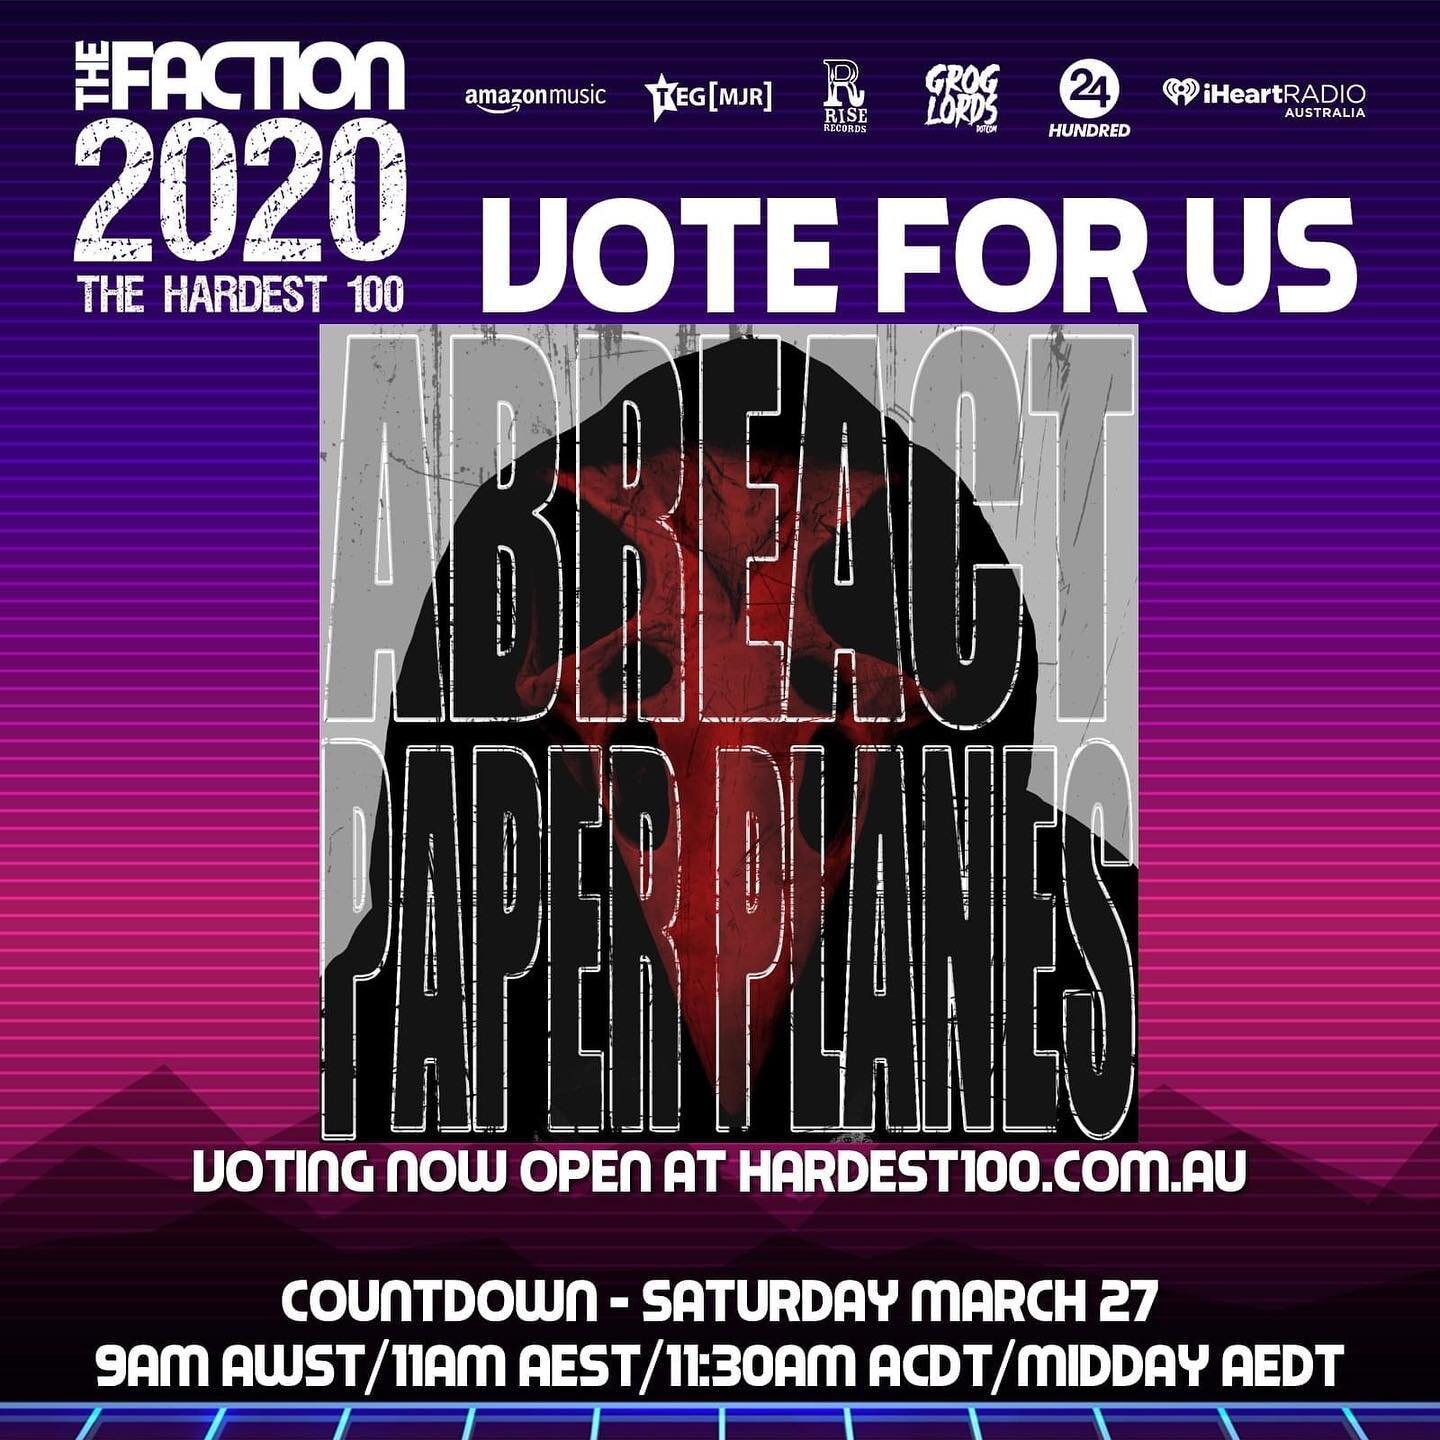 Voting is open for the @thefactionlive Hardest 100 and we have been lucky enough to have our latest single 'Paper Planes' included on the list! 
We'd be stoked as if you could sling us a vote in amongst your 10 tracks of the year!
Vote at hardest100.